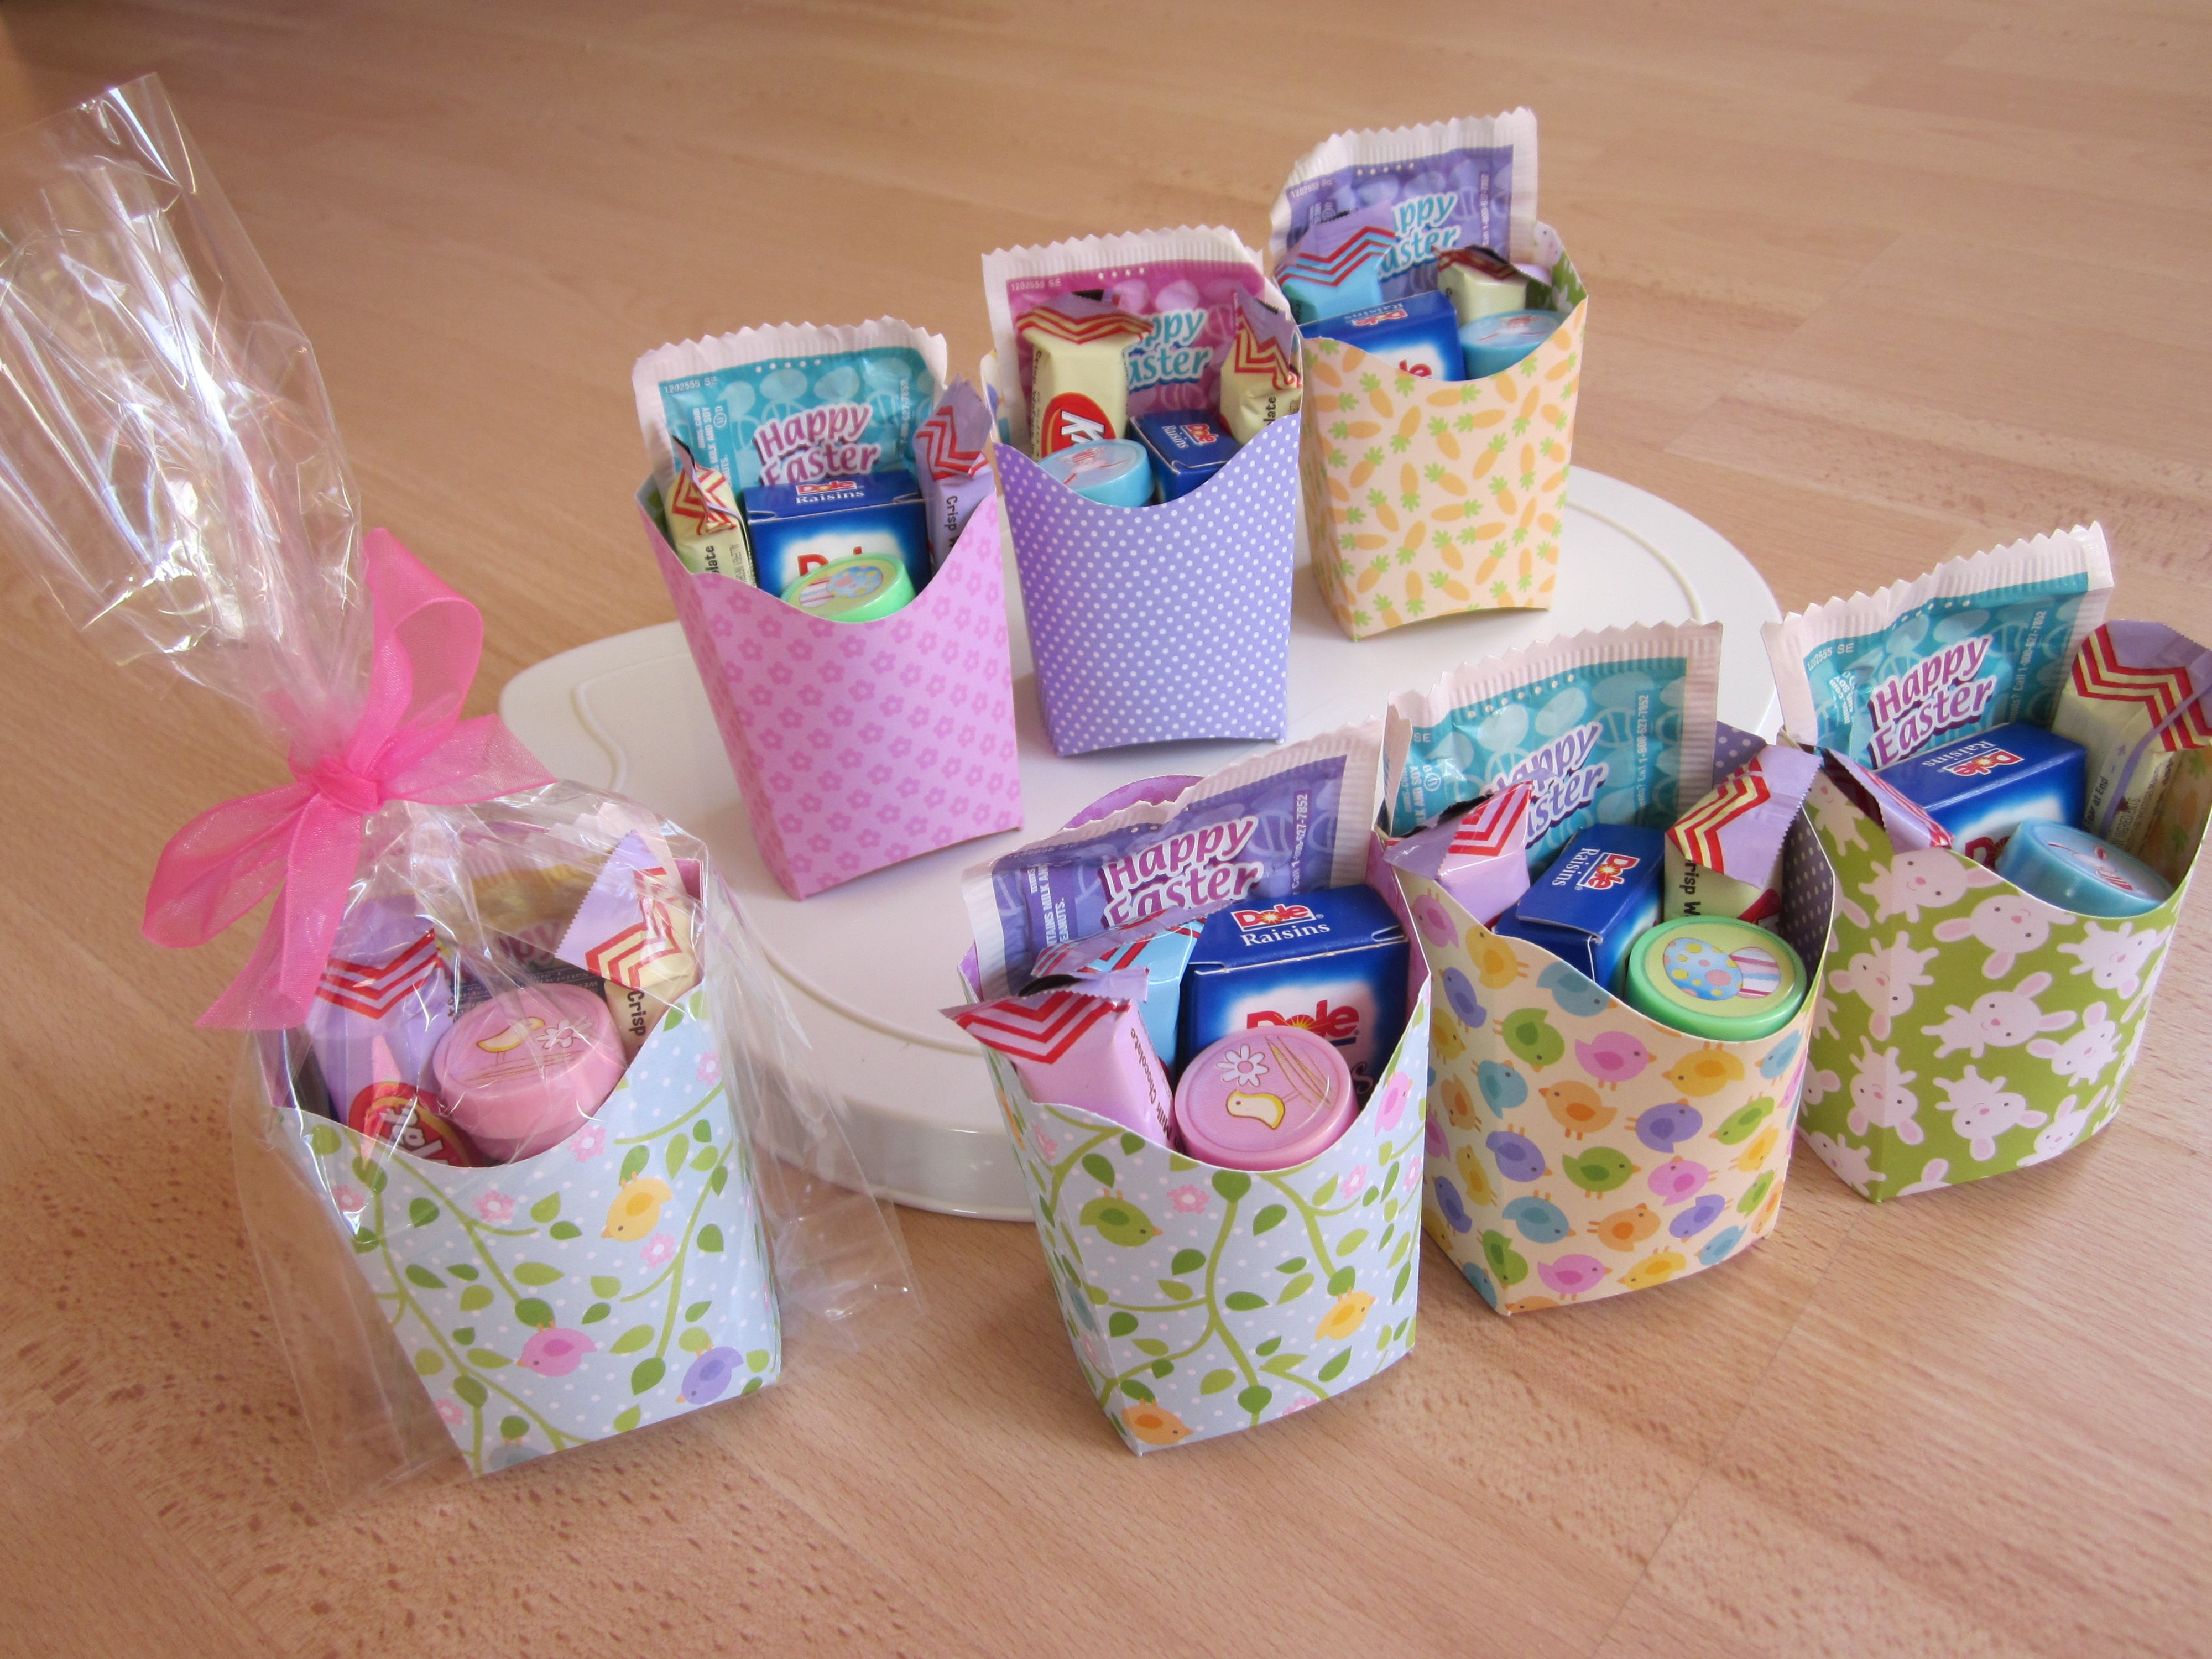 Classroom Easter Party Ideas
 Actually I made these Easter goody bags for Elle s